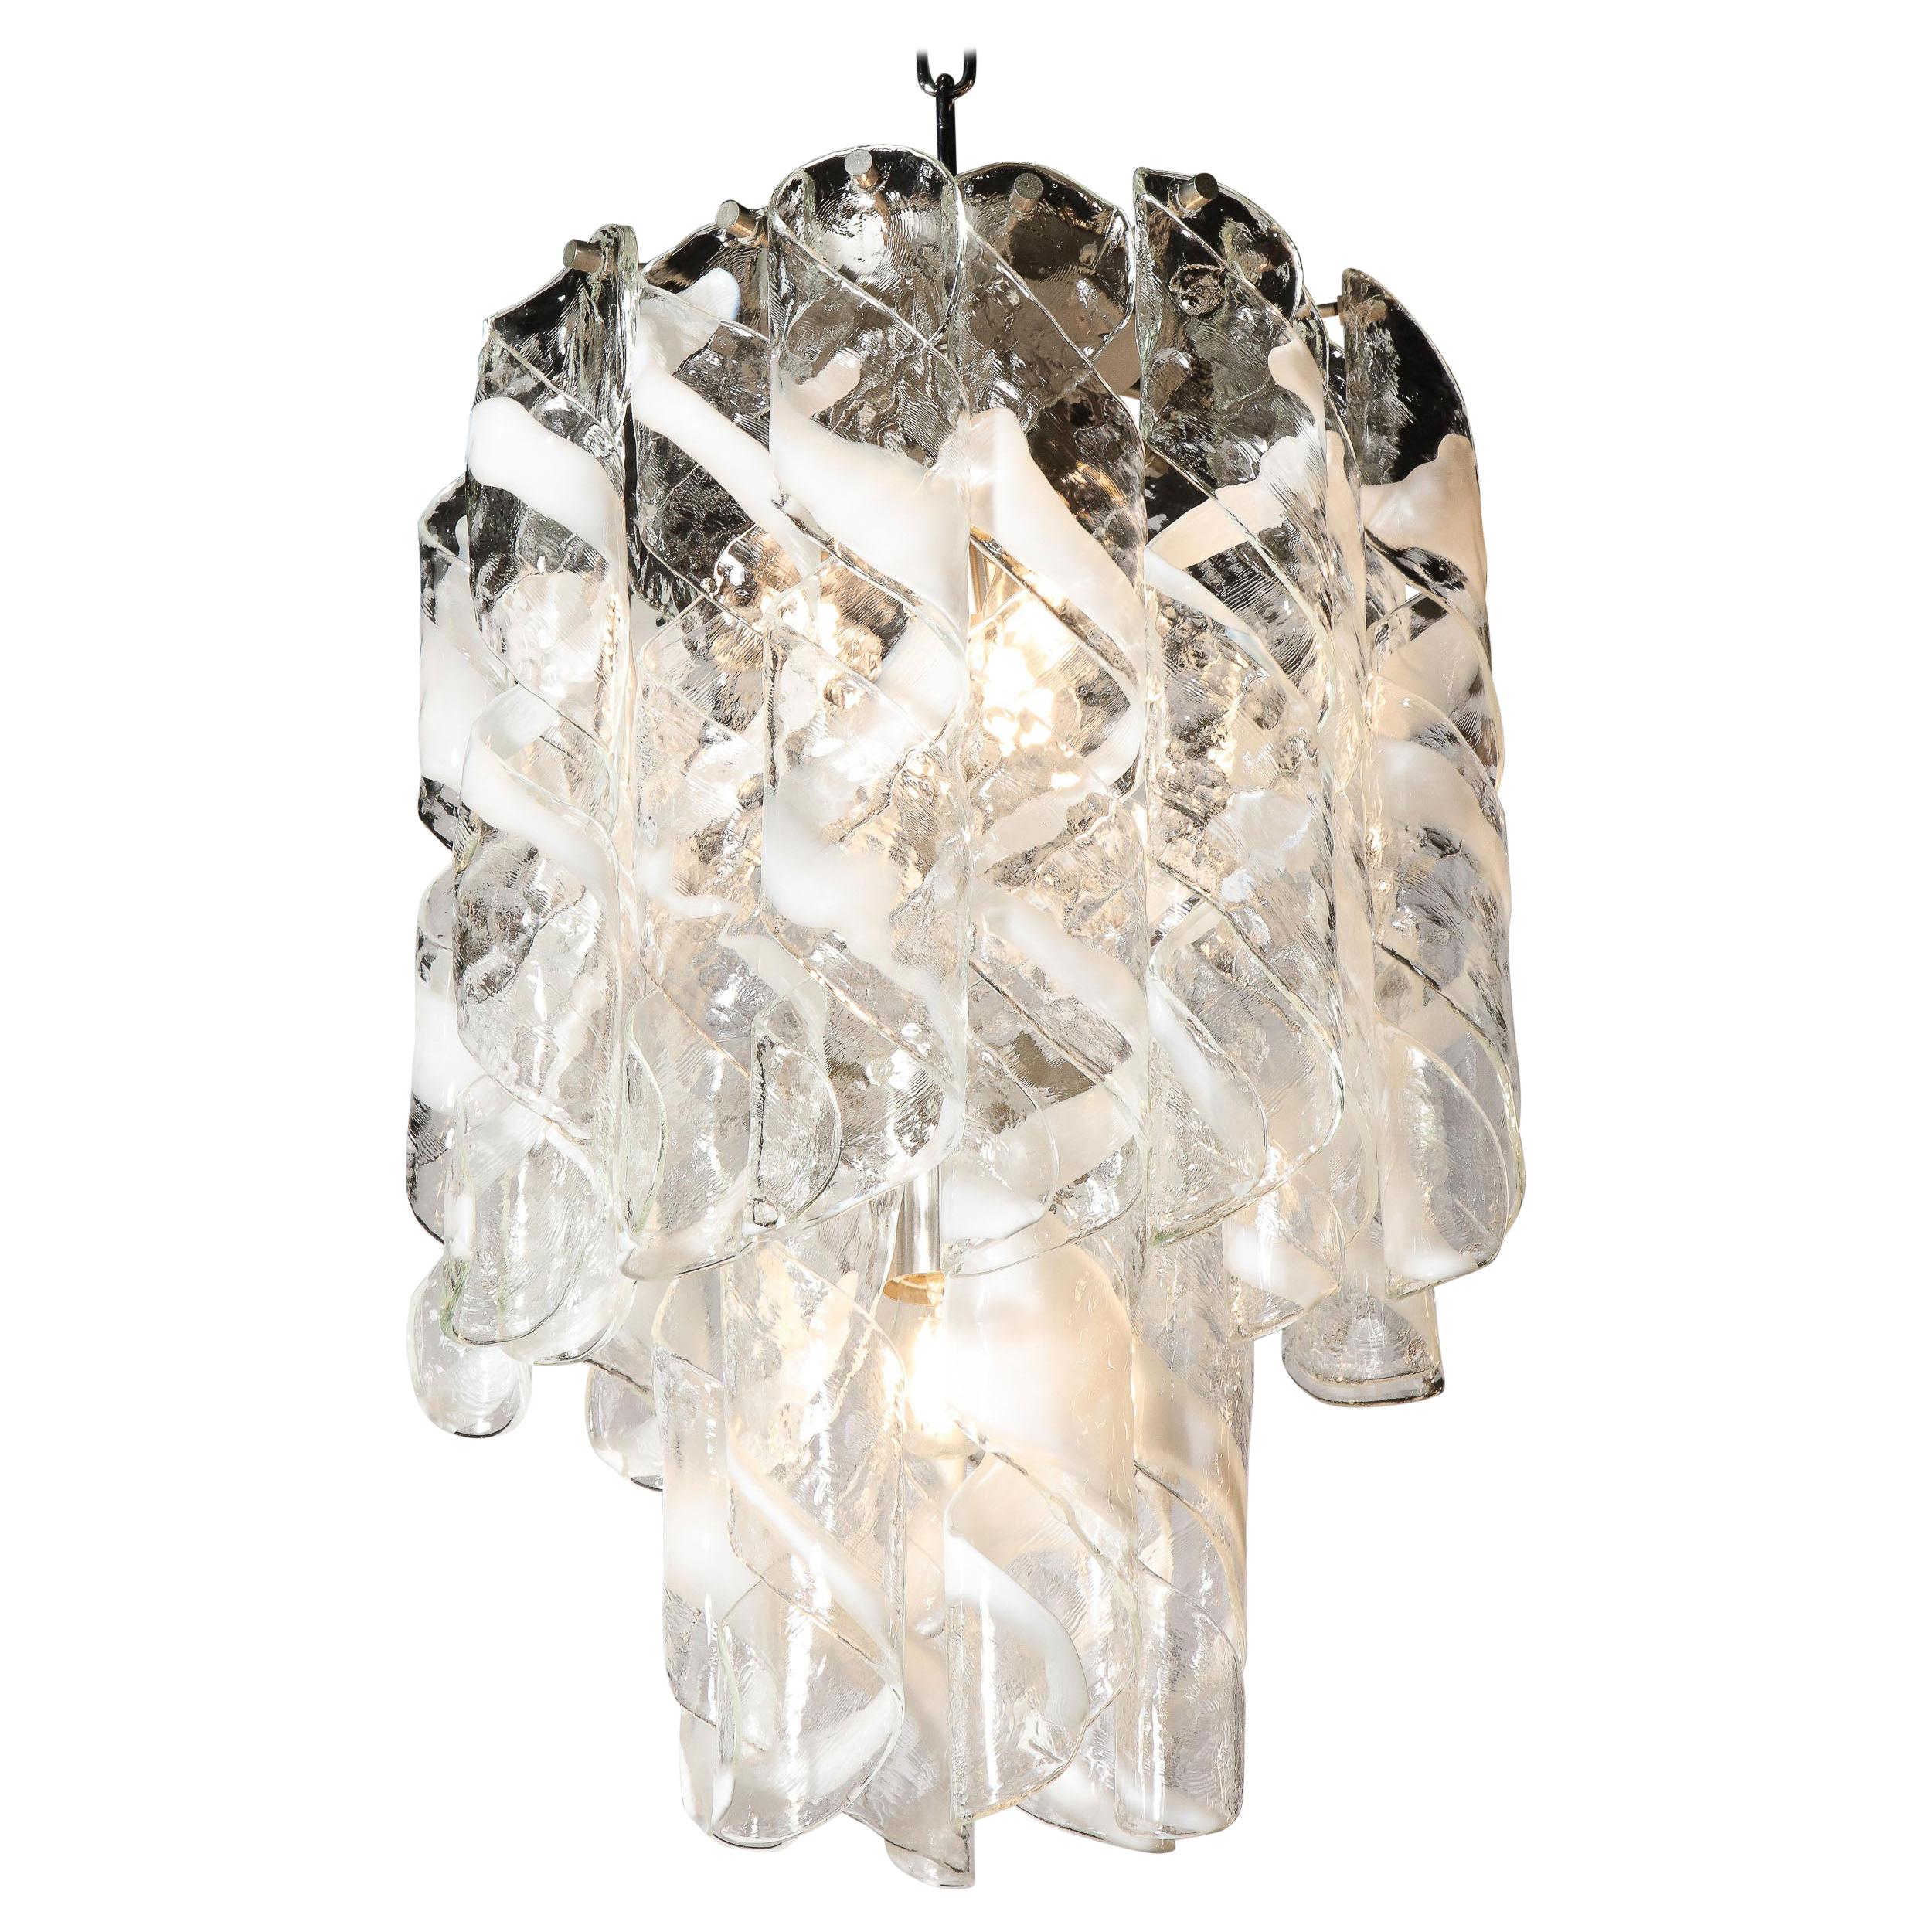 Midcentury Hand Blown Murano Translucent and White Glass Helix Form Chandelier